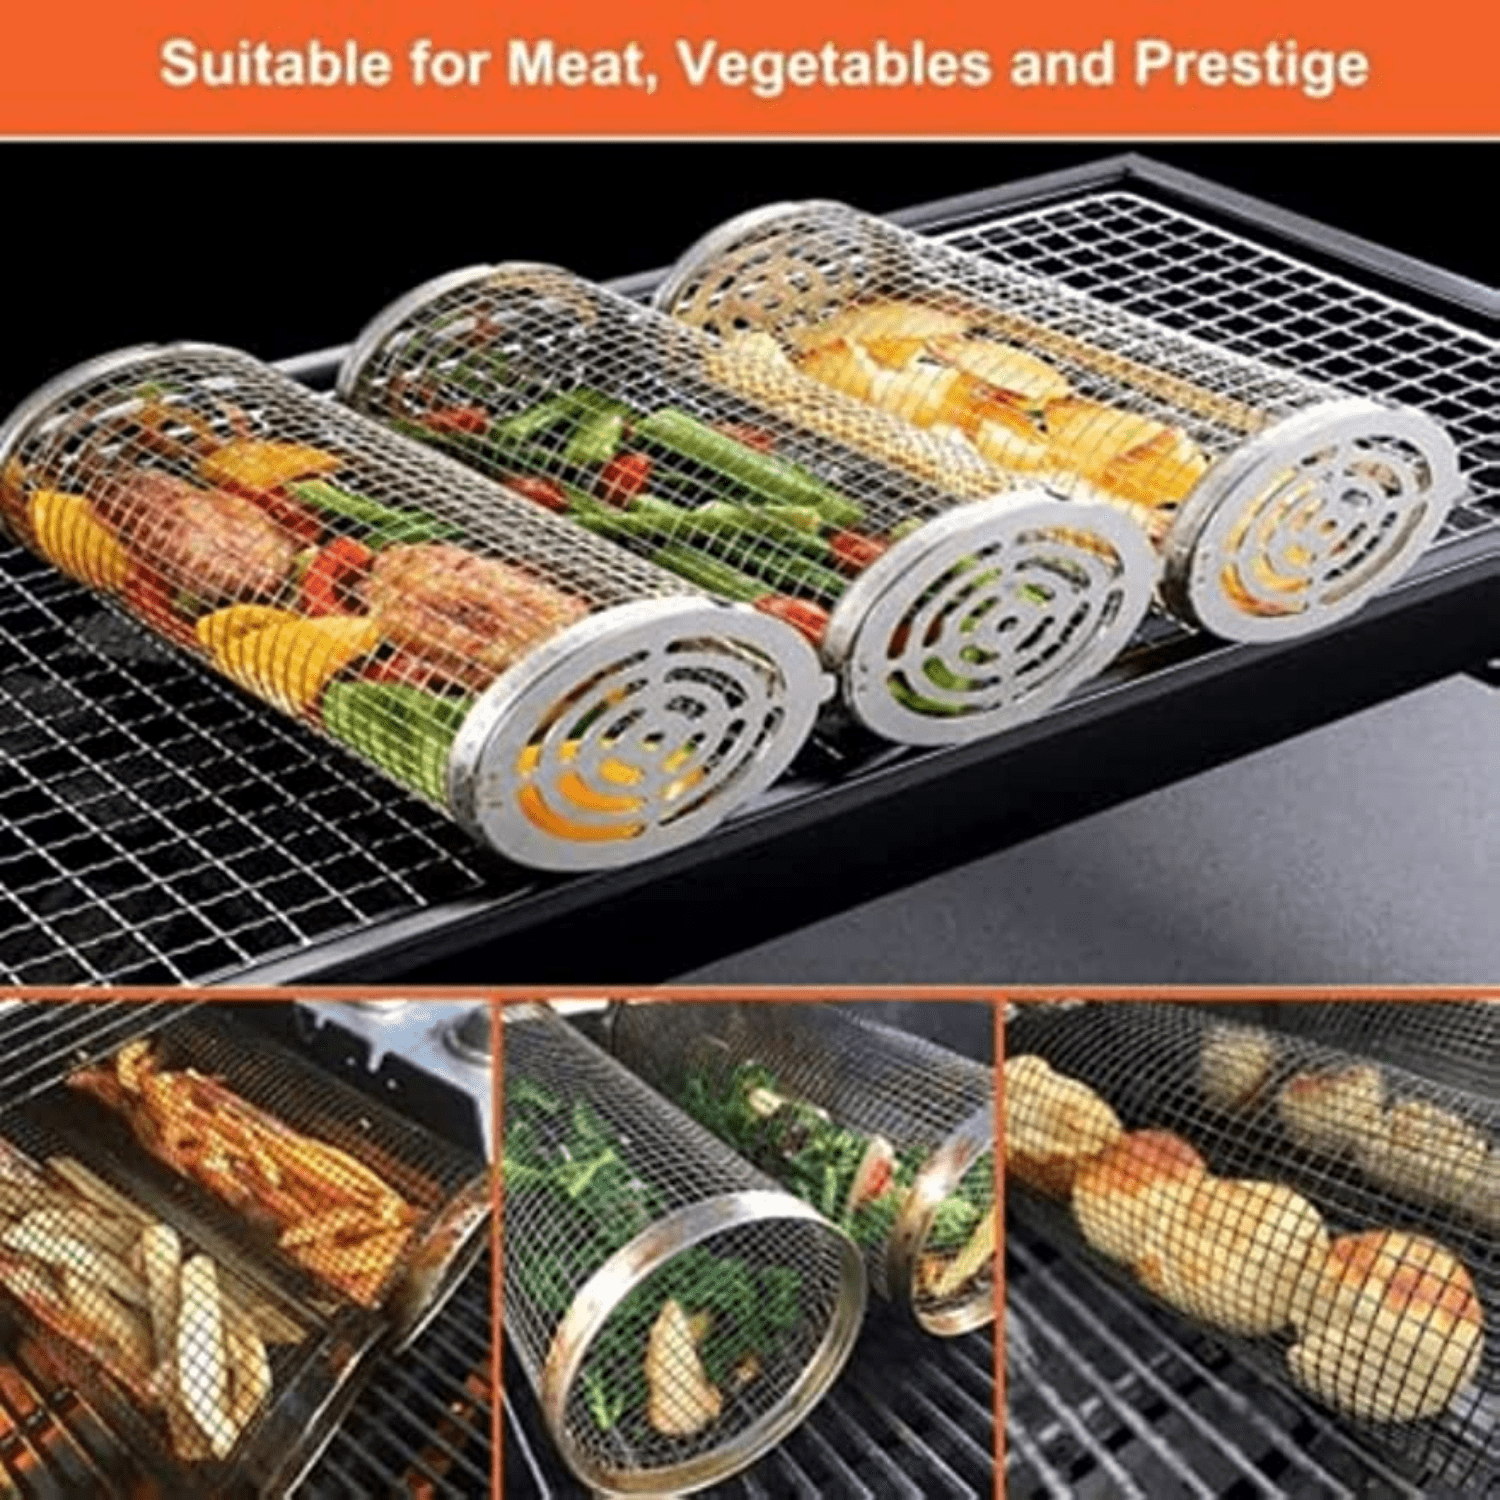 Angoily Oven Crisper Basket Rotating Grilled Cage Drum Oven Basket Kitchen  Rolling Grill Basket Oven Roast Basket Roast Baking Cage for Barbecue